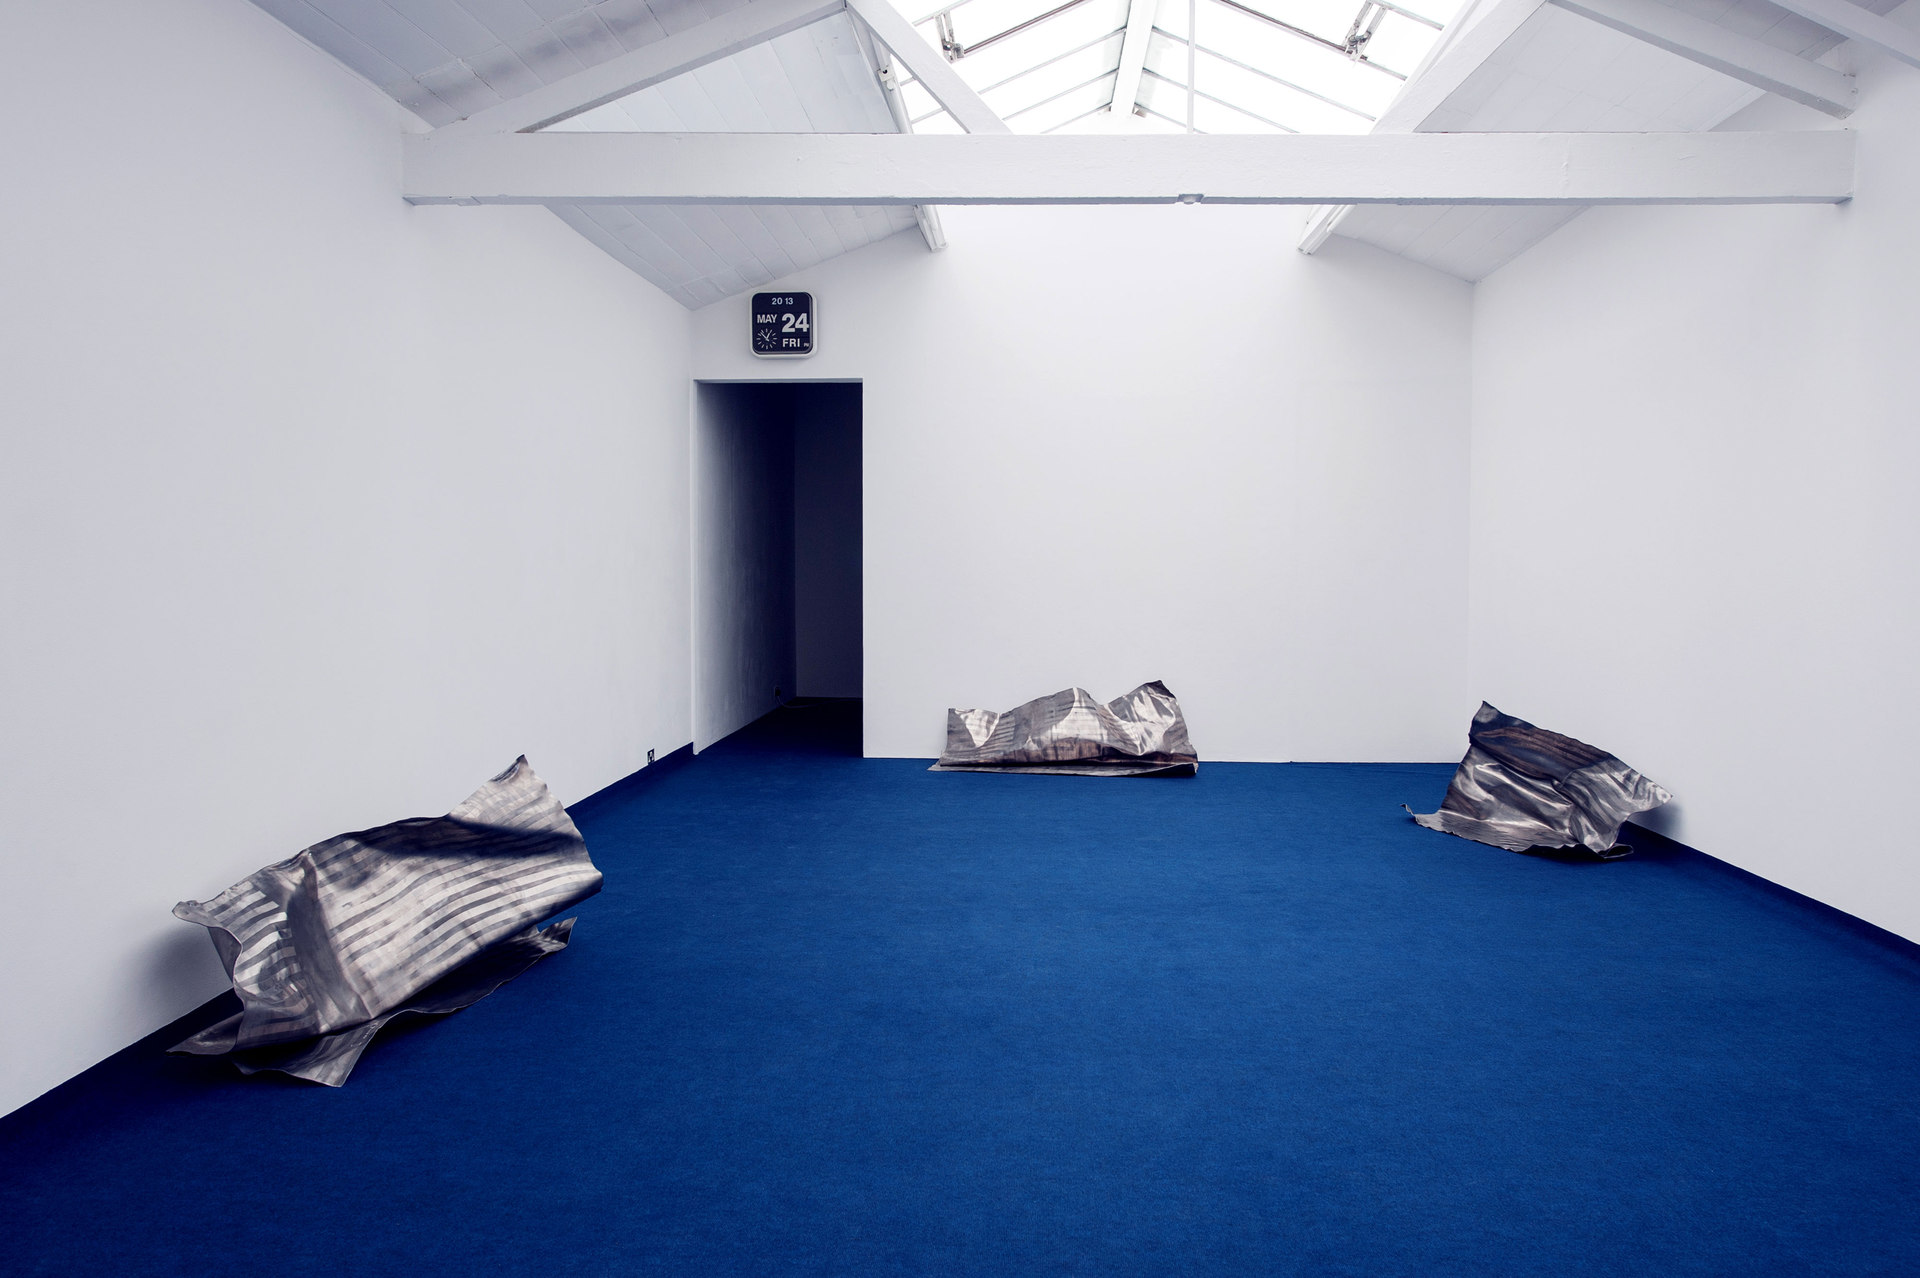 Florian Auer, BABIES ARE BORN AT NIGHT, 2013, installation view